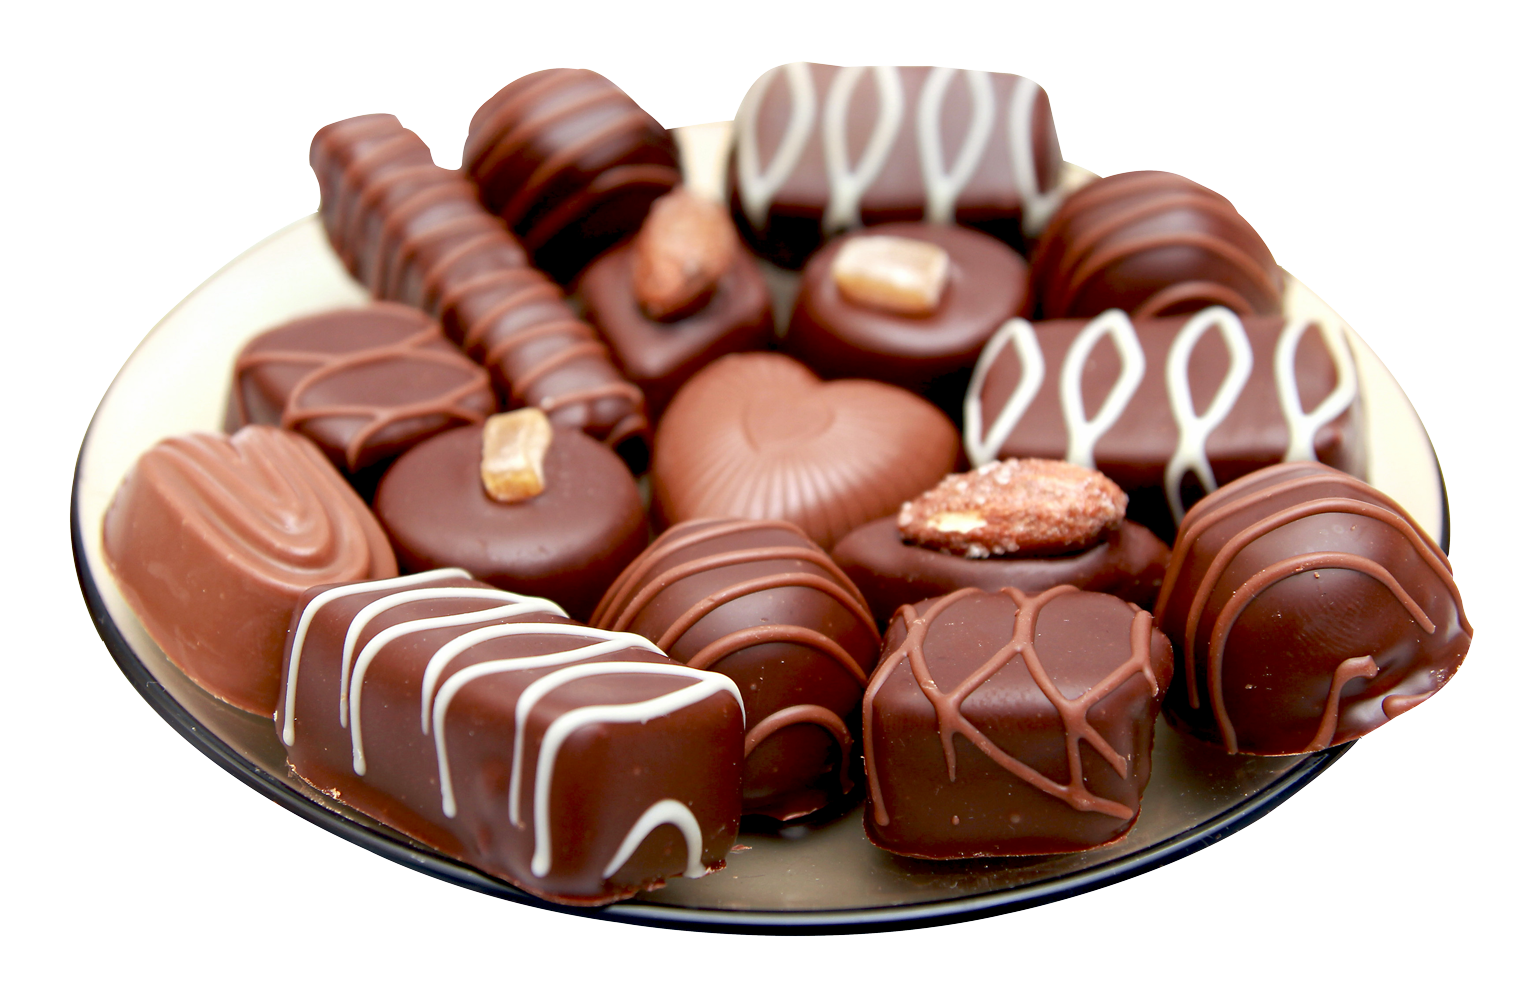 Download Chocolates In Plate Png Image For Free